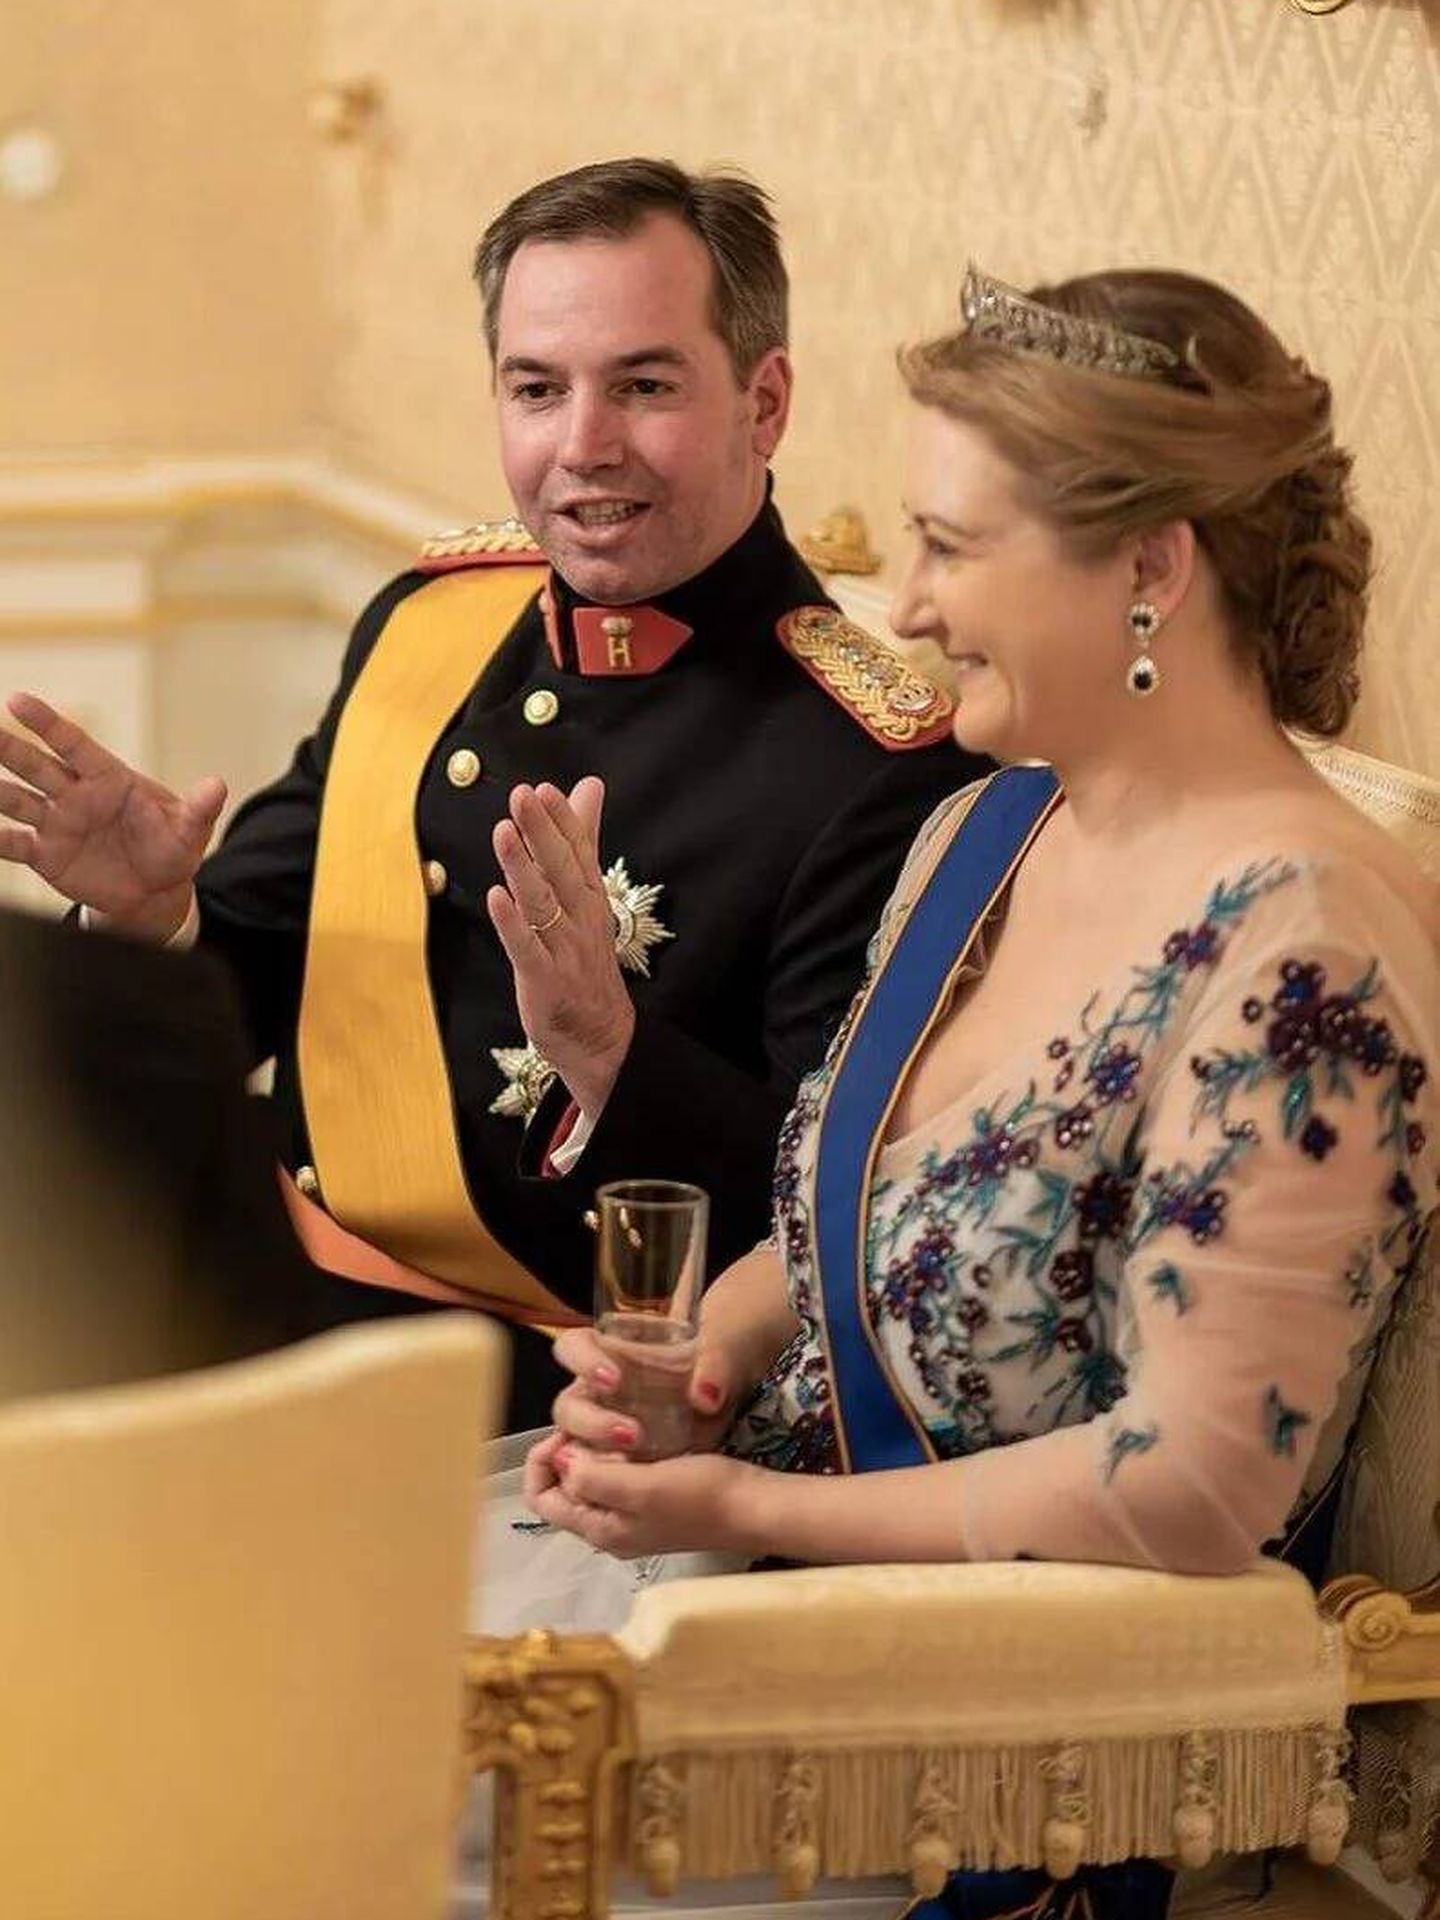 Los grandes duques herederos. (Court Grand Ducal)